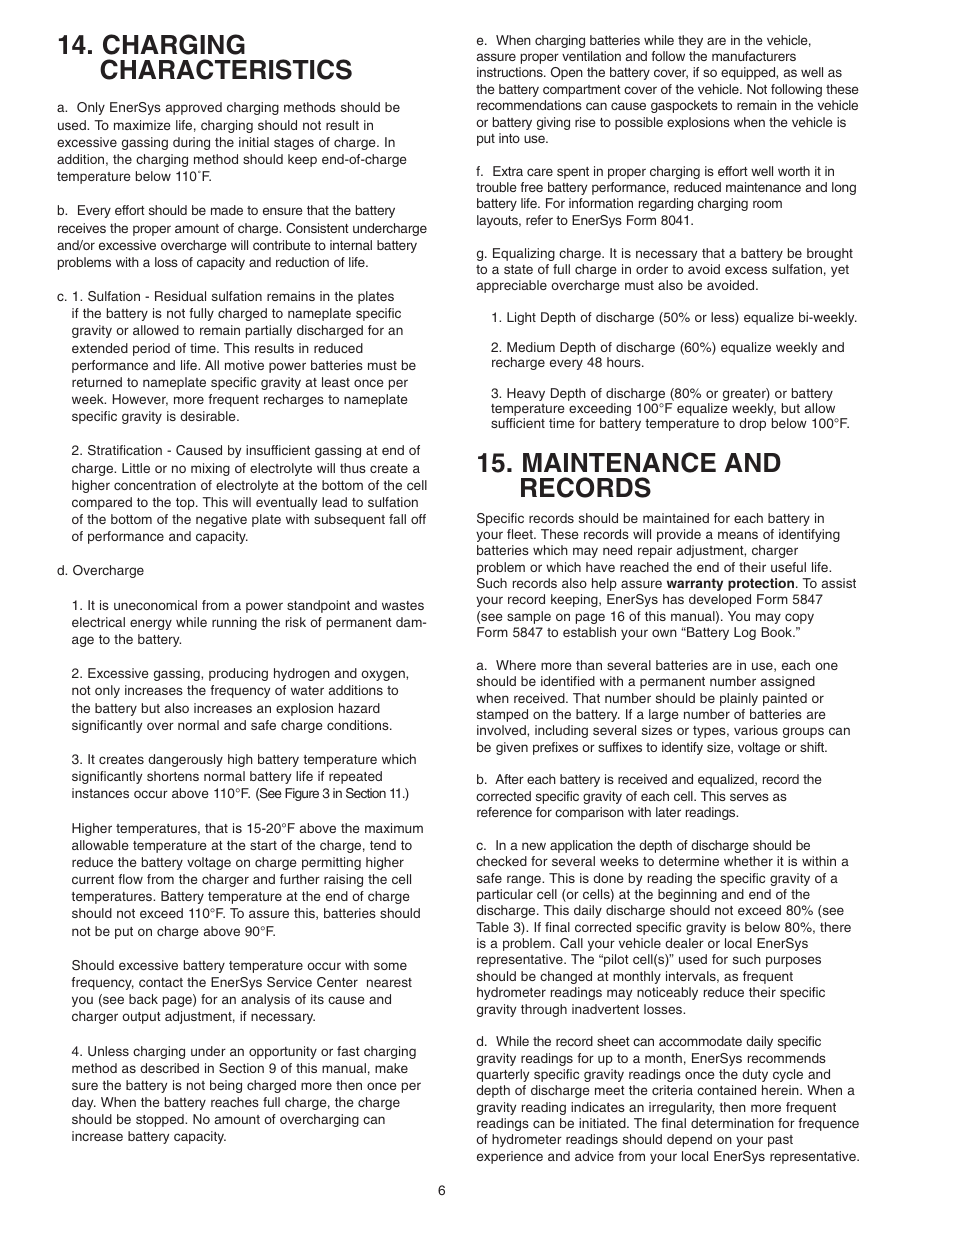 Charging characteristics, Maintenance and records | Ironclad Automobile Parts User Manual | Page 6 / 11